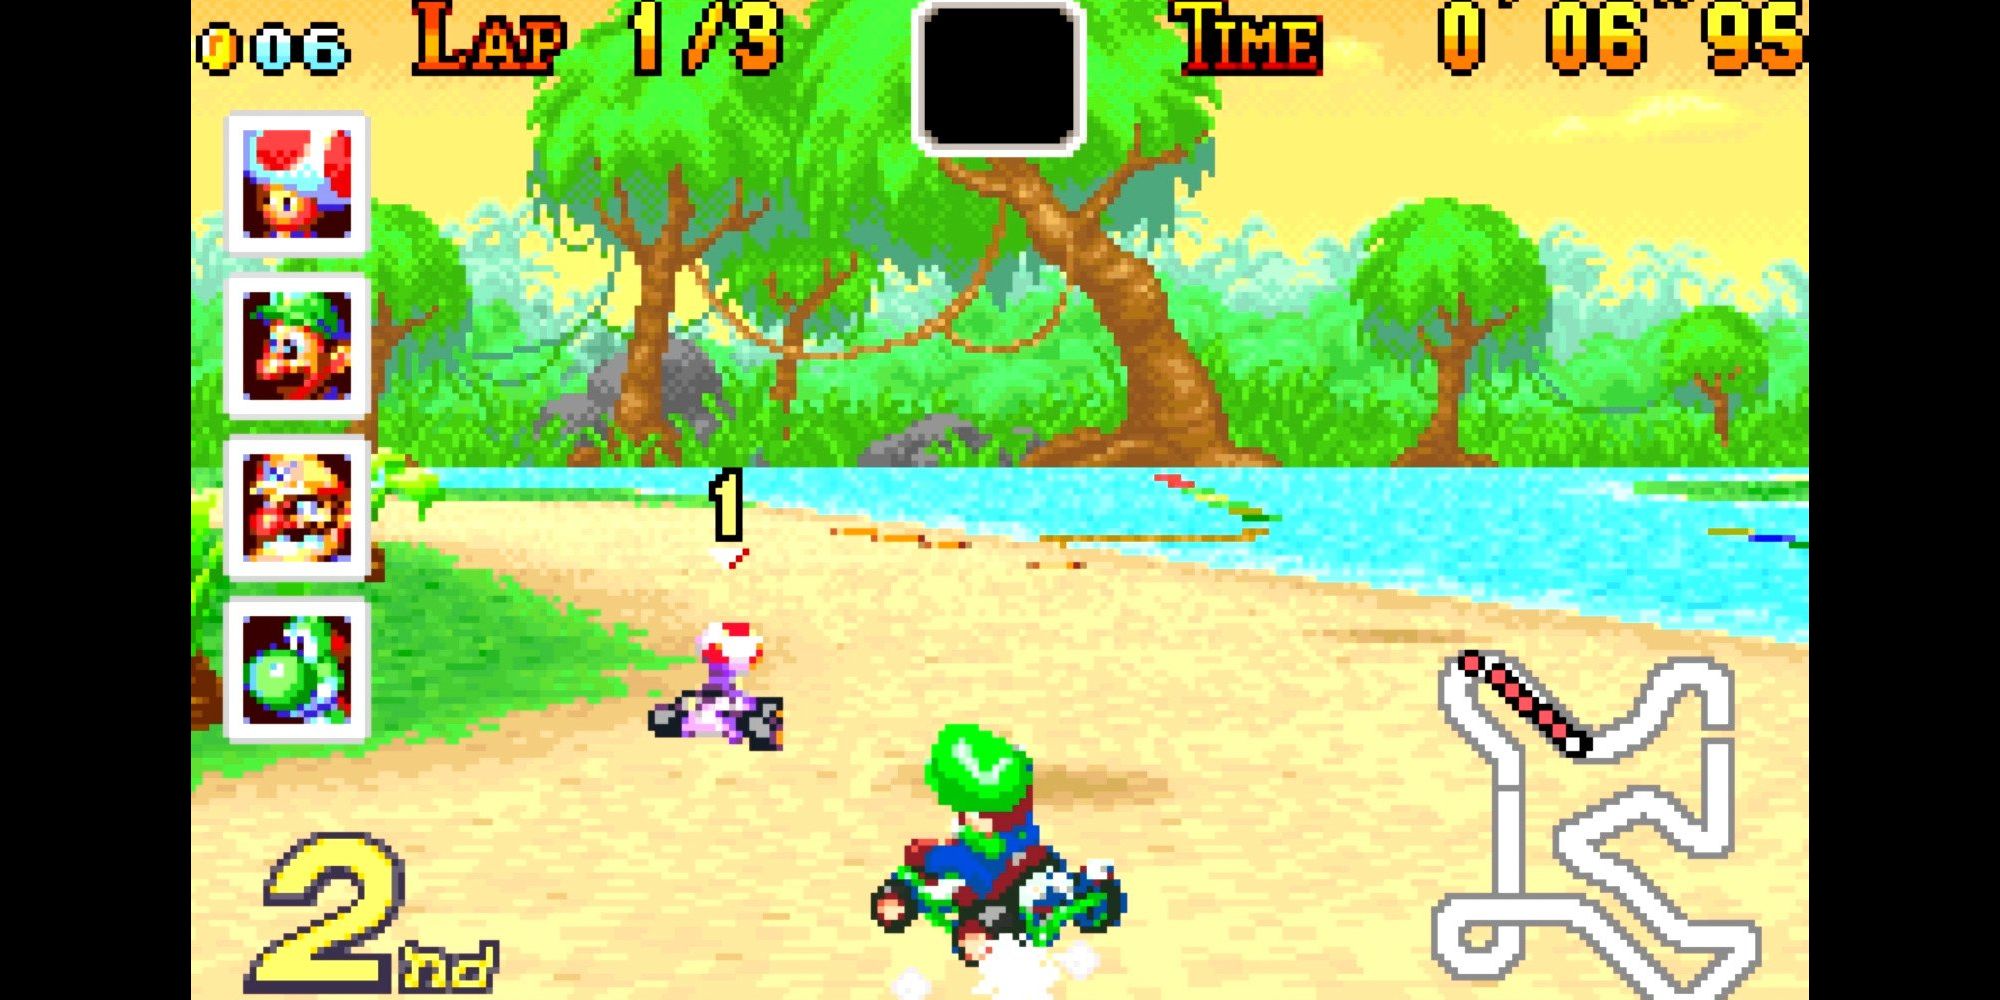 Luigi trails Toad for first place in Mario Kart Super Circuit